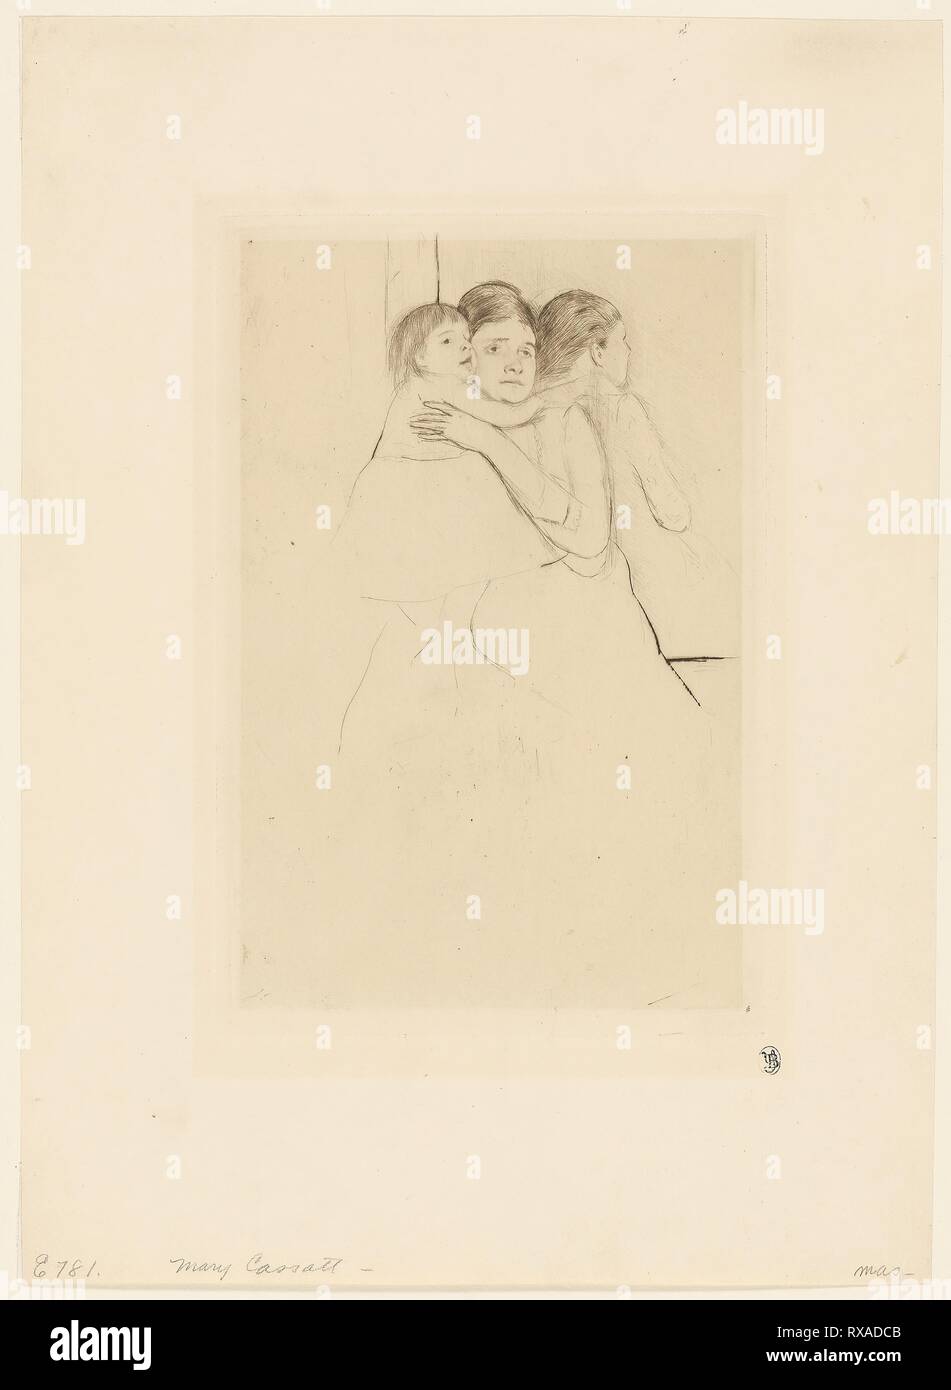 Mother Berthe Holding Her Child. Mary Cassatt; American, 1844-1926. Date: 1889. Dimensions: 220 x 144 mm (image); 236 x 159 mm (plate); 367 x 262 mm (sheet). Drypoint on cream wove paper. Origin: United States. Museum: The Chicago Art Institute. Stock Photo